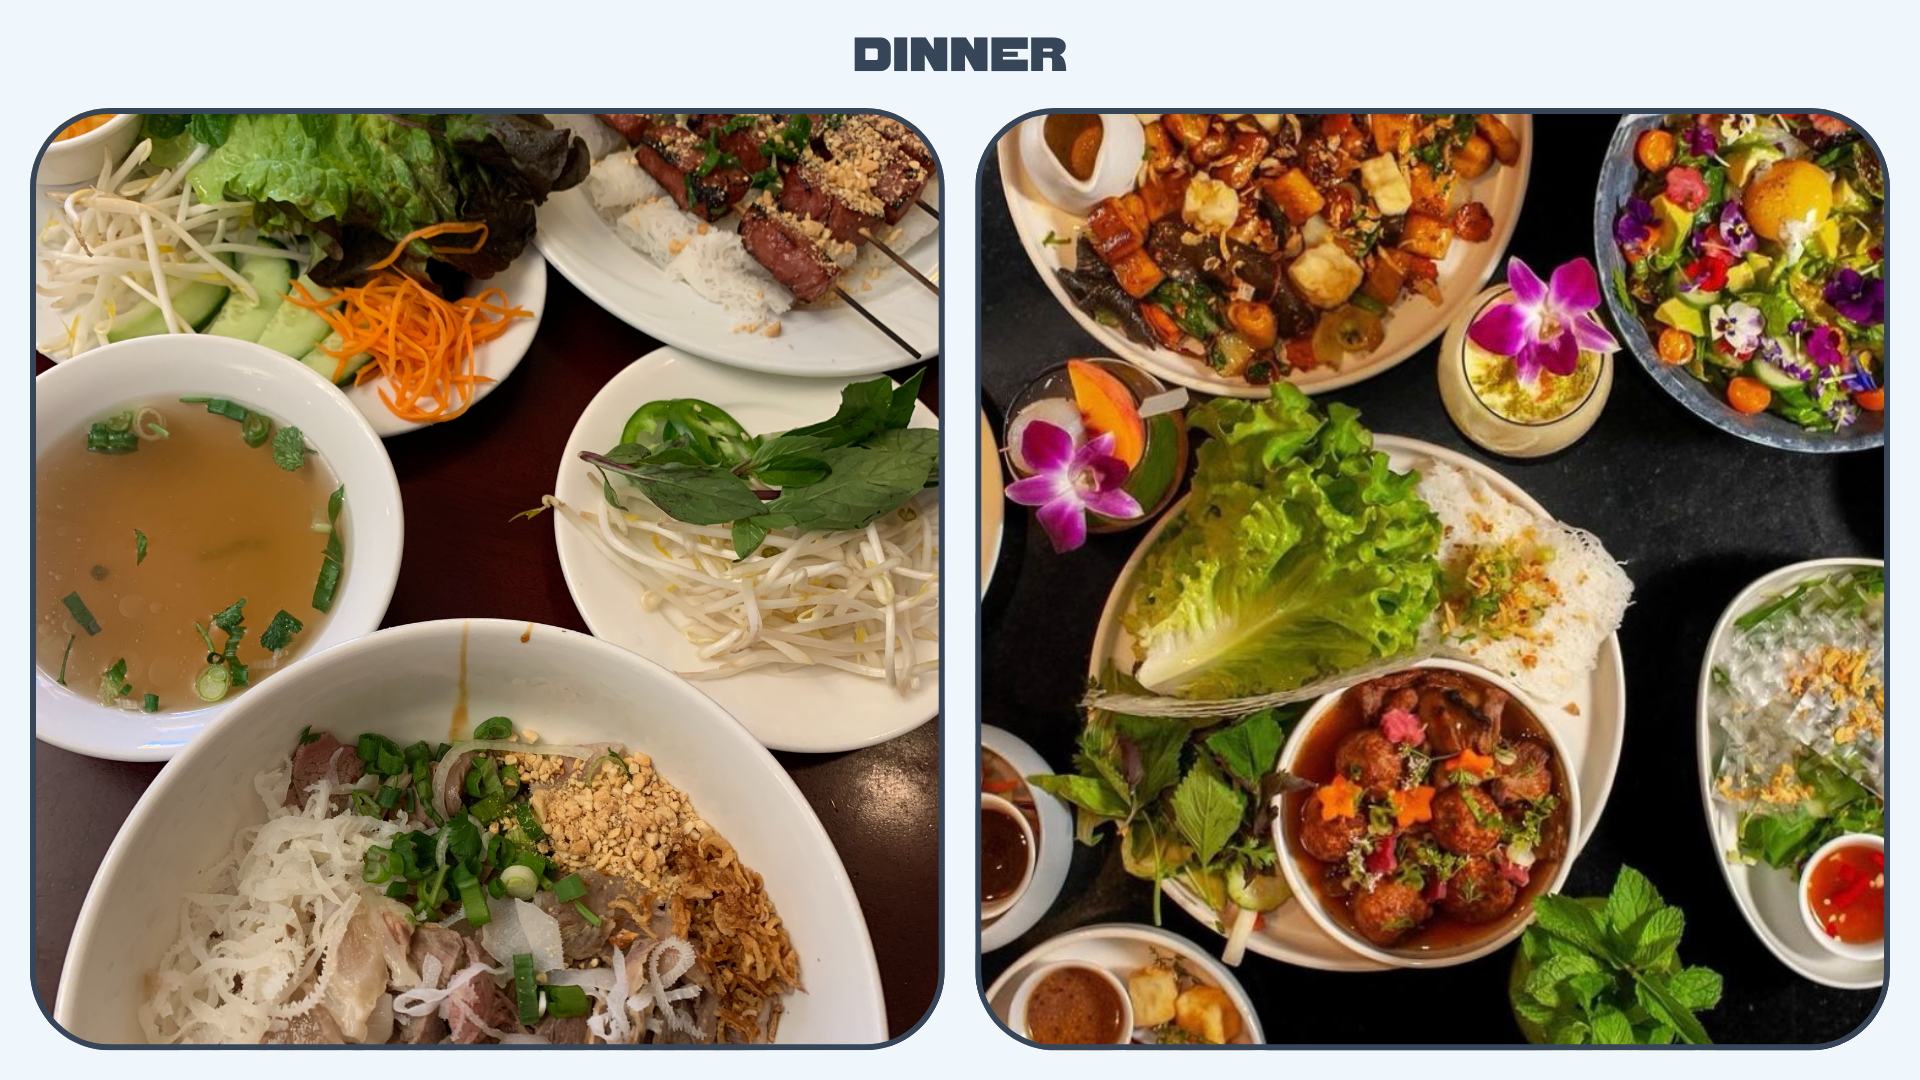 L: Plates of Vietnamese food on a table incl. pho. R: Similarly colorful plates of Vietnamese dishes